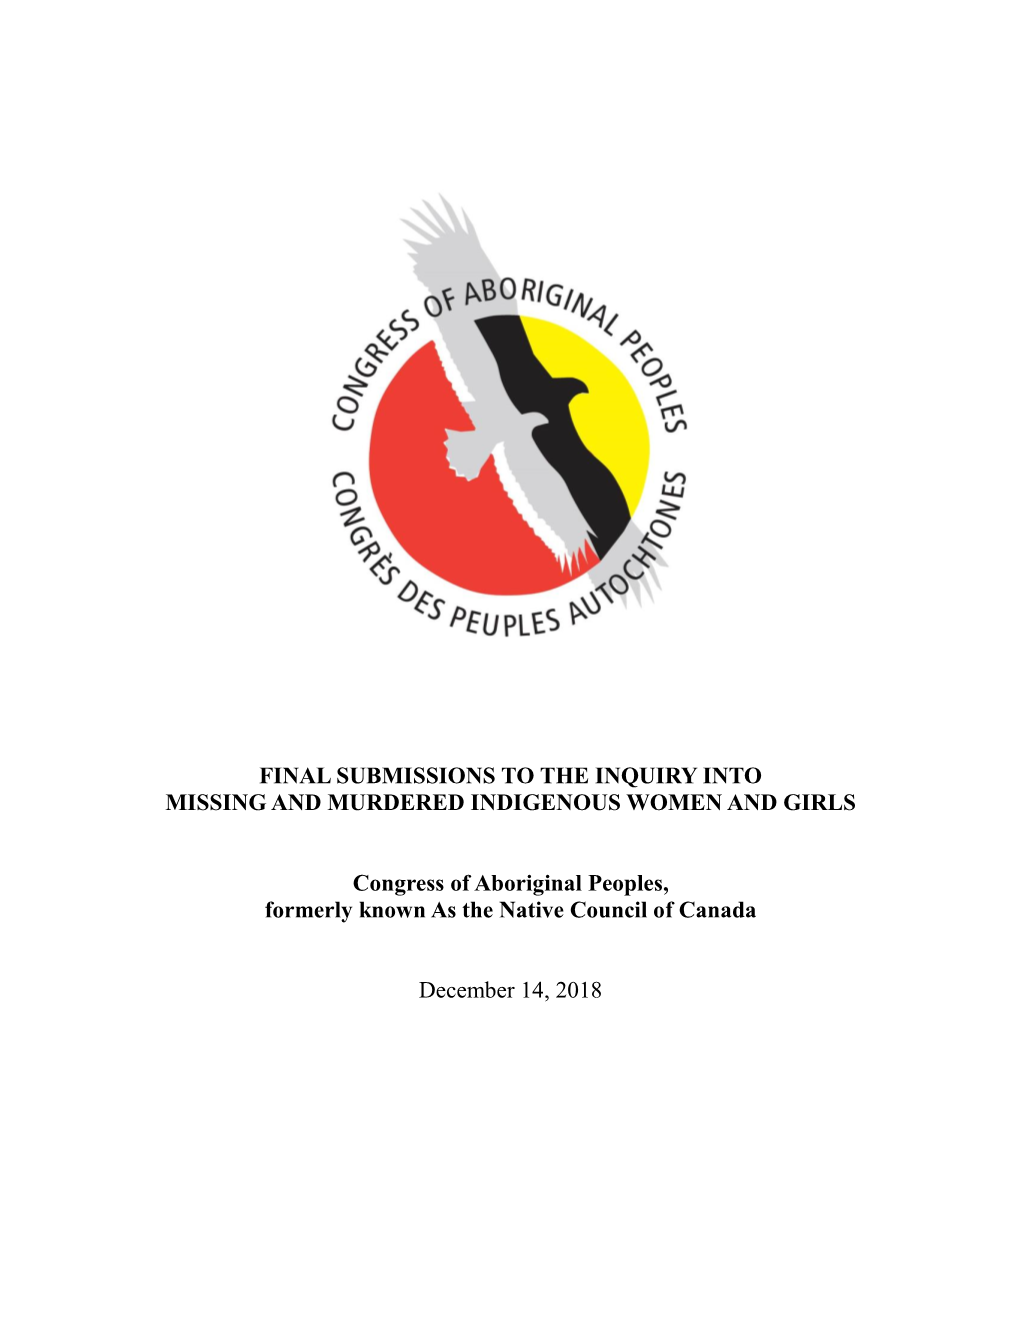 FINAL SUBMISSIONS to the INQUIRY INTO MISSING and MURDERED INDIGENOUS WOMEN and GIRLS Congress of Aboriginal Peoples, Formerly Known As the Native Council of Canada